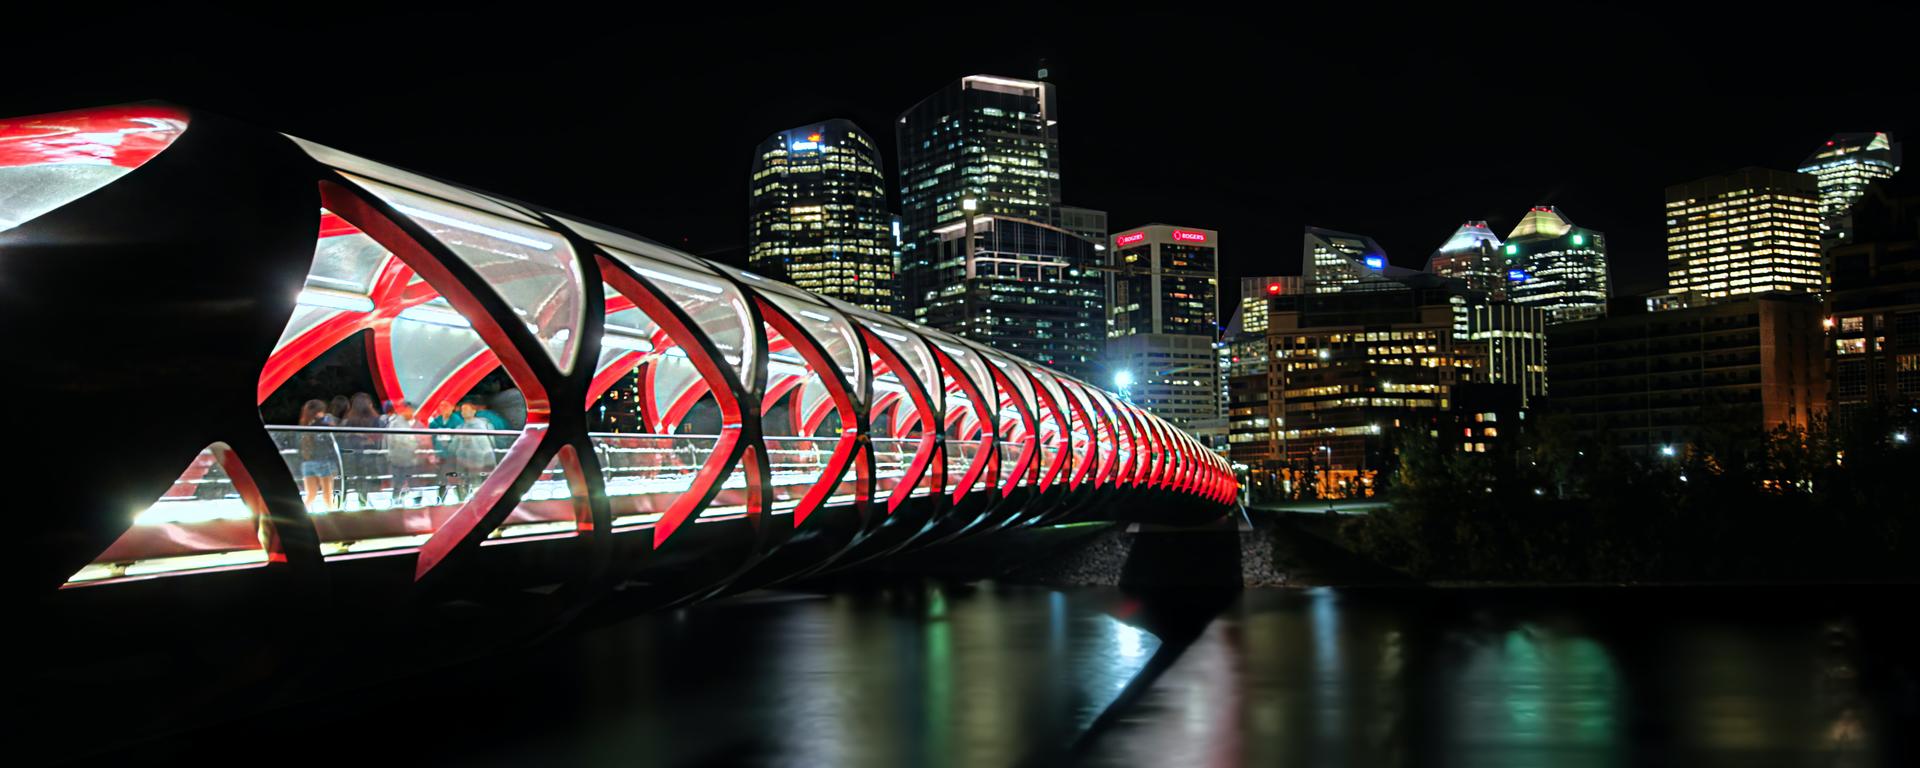 A night shot of the Peace Bridge over the Bow River in Calgary